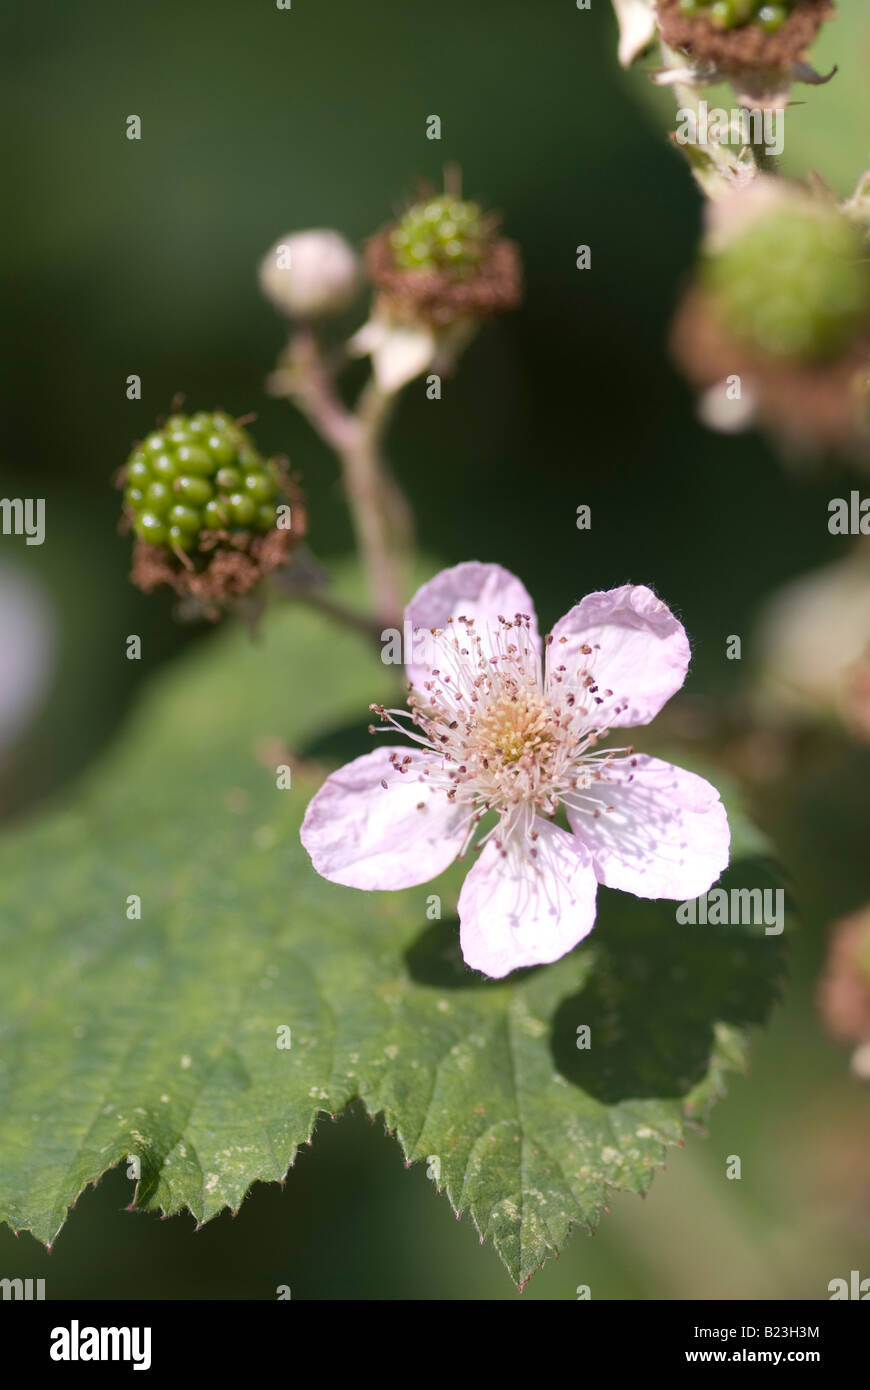 wild blackberry with flower, leaf and unripe berry Stock Photo